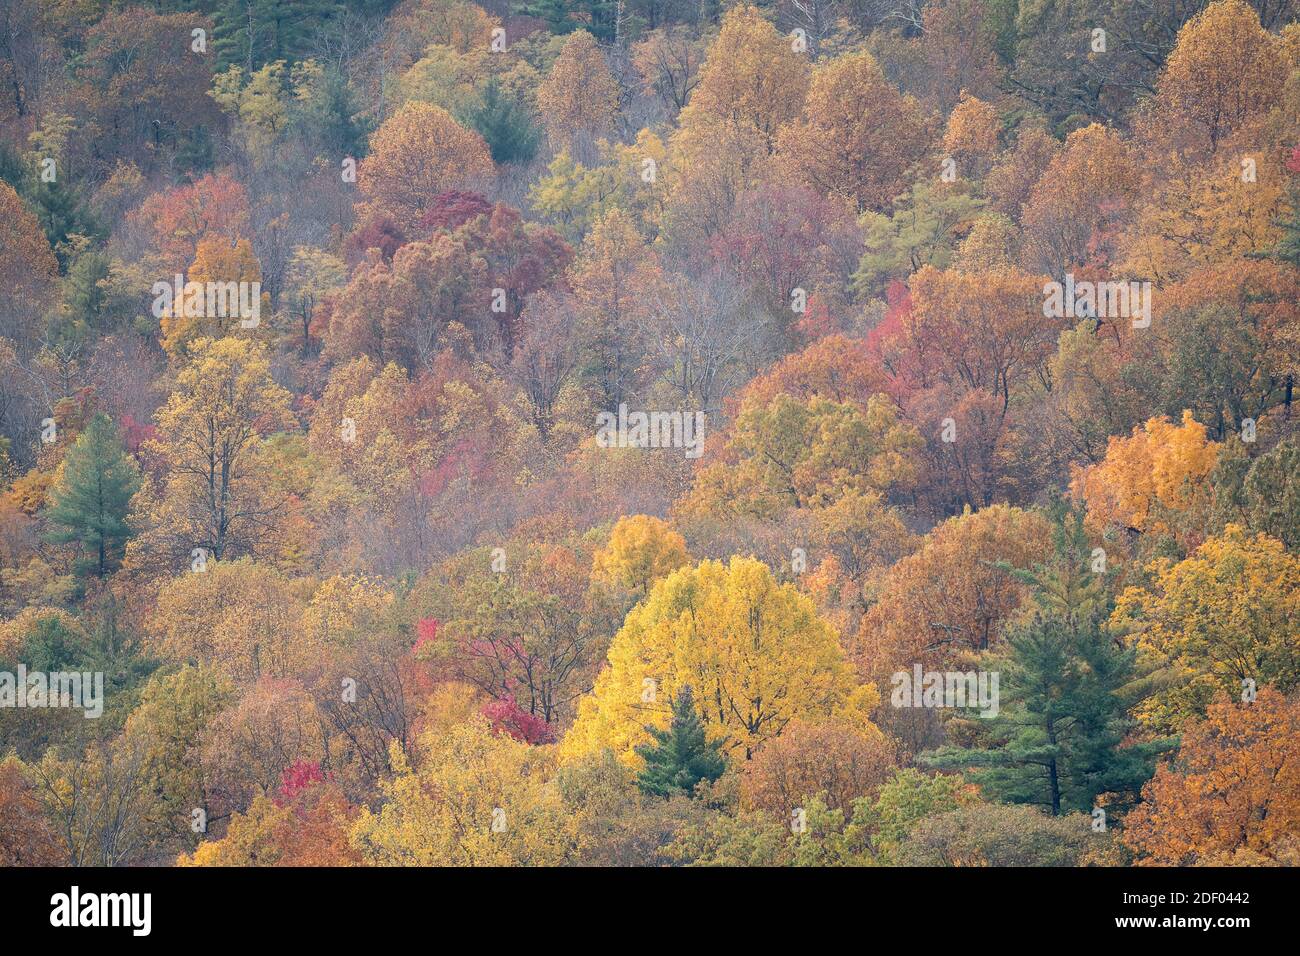 Fall foliage blankets the forests in the Shenandoah National Park and Shenandoah Valley in Virginia. Stock Photo